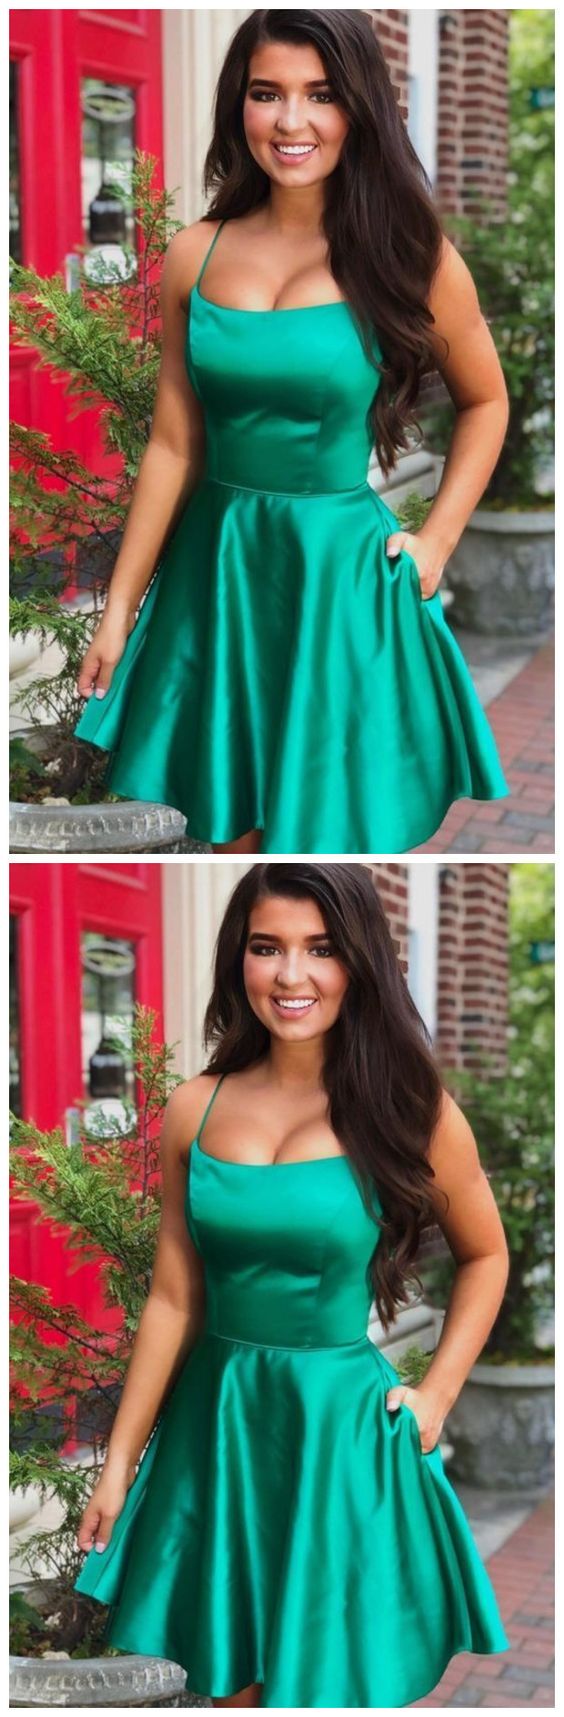 Victoria Homecoming Dresses Spaghetti Straps Green Hoco Party Dresses Gowns 14145